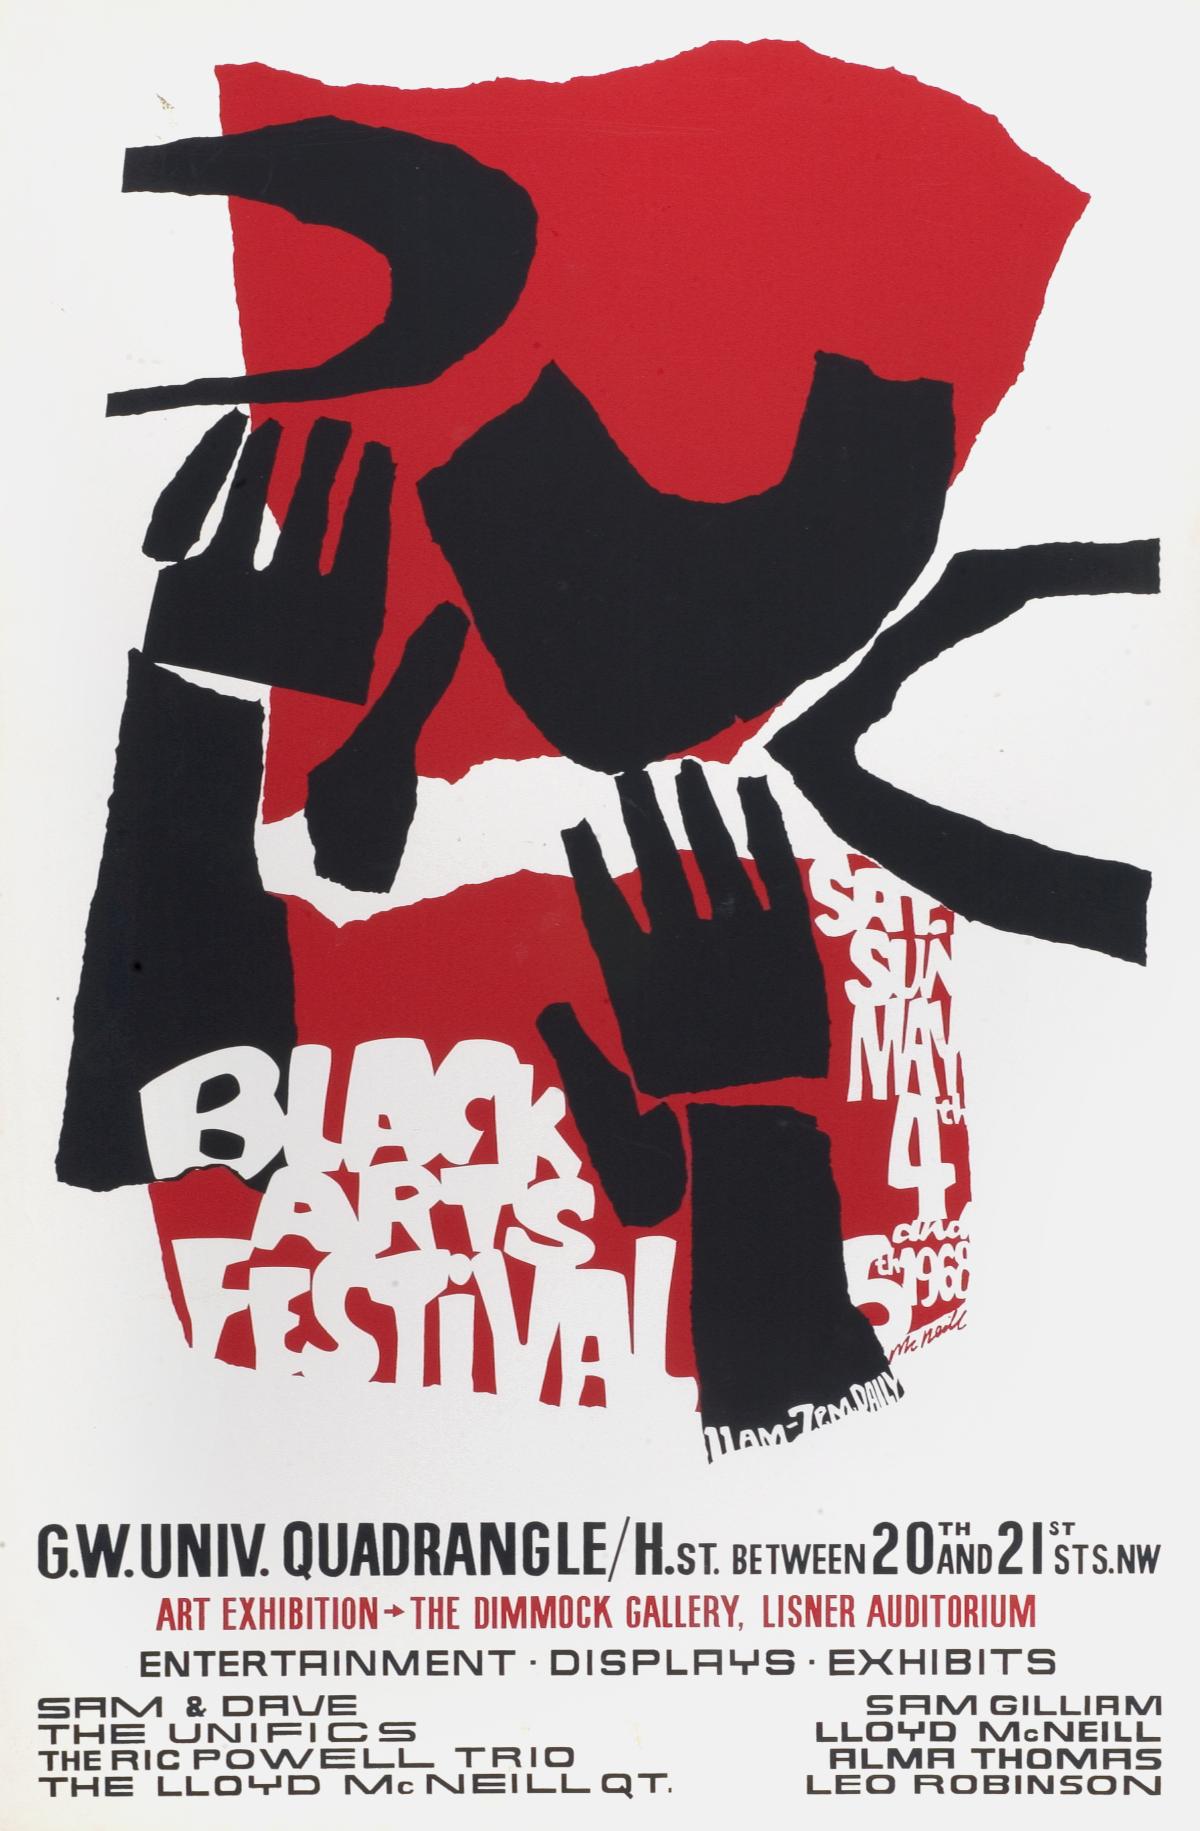 poster advertising the Black Arts Festival, in red and black